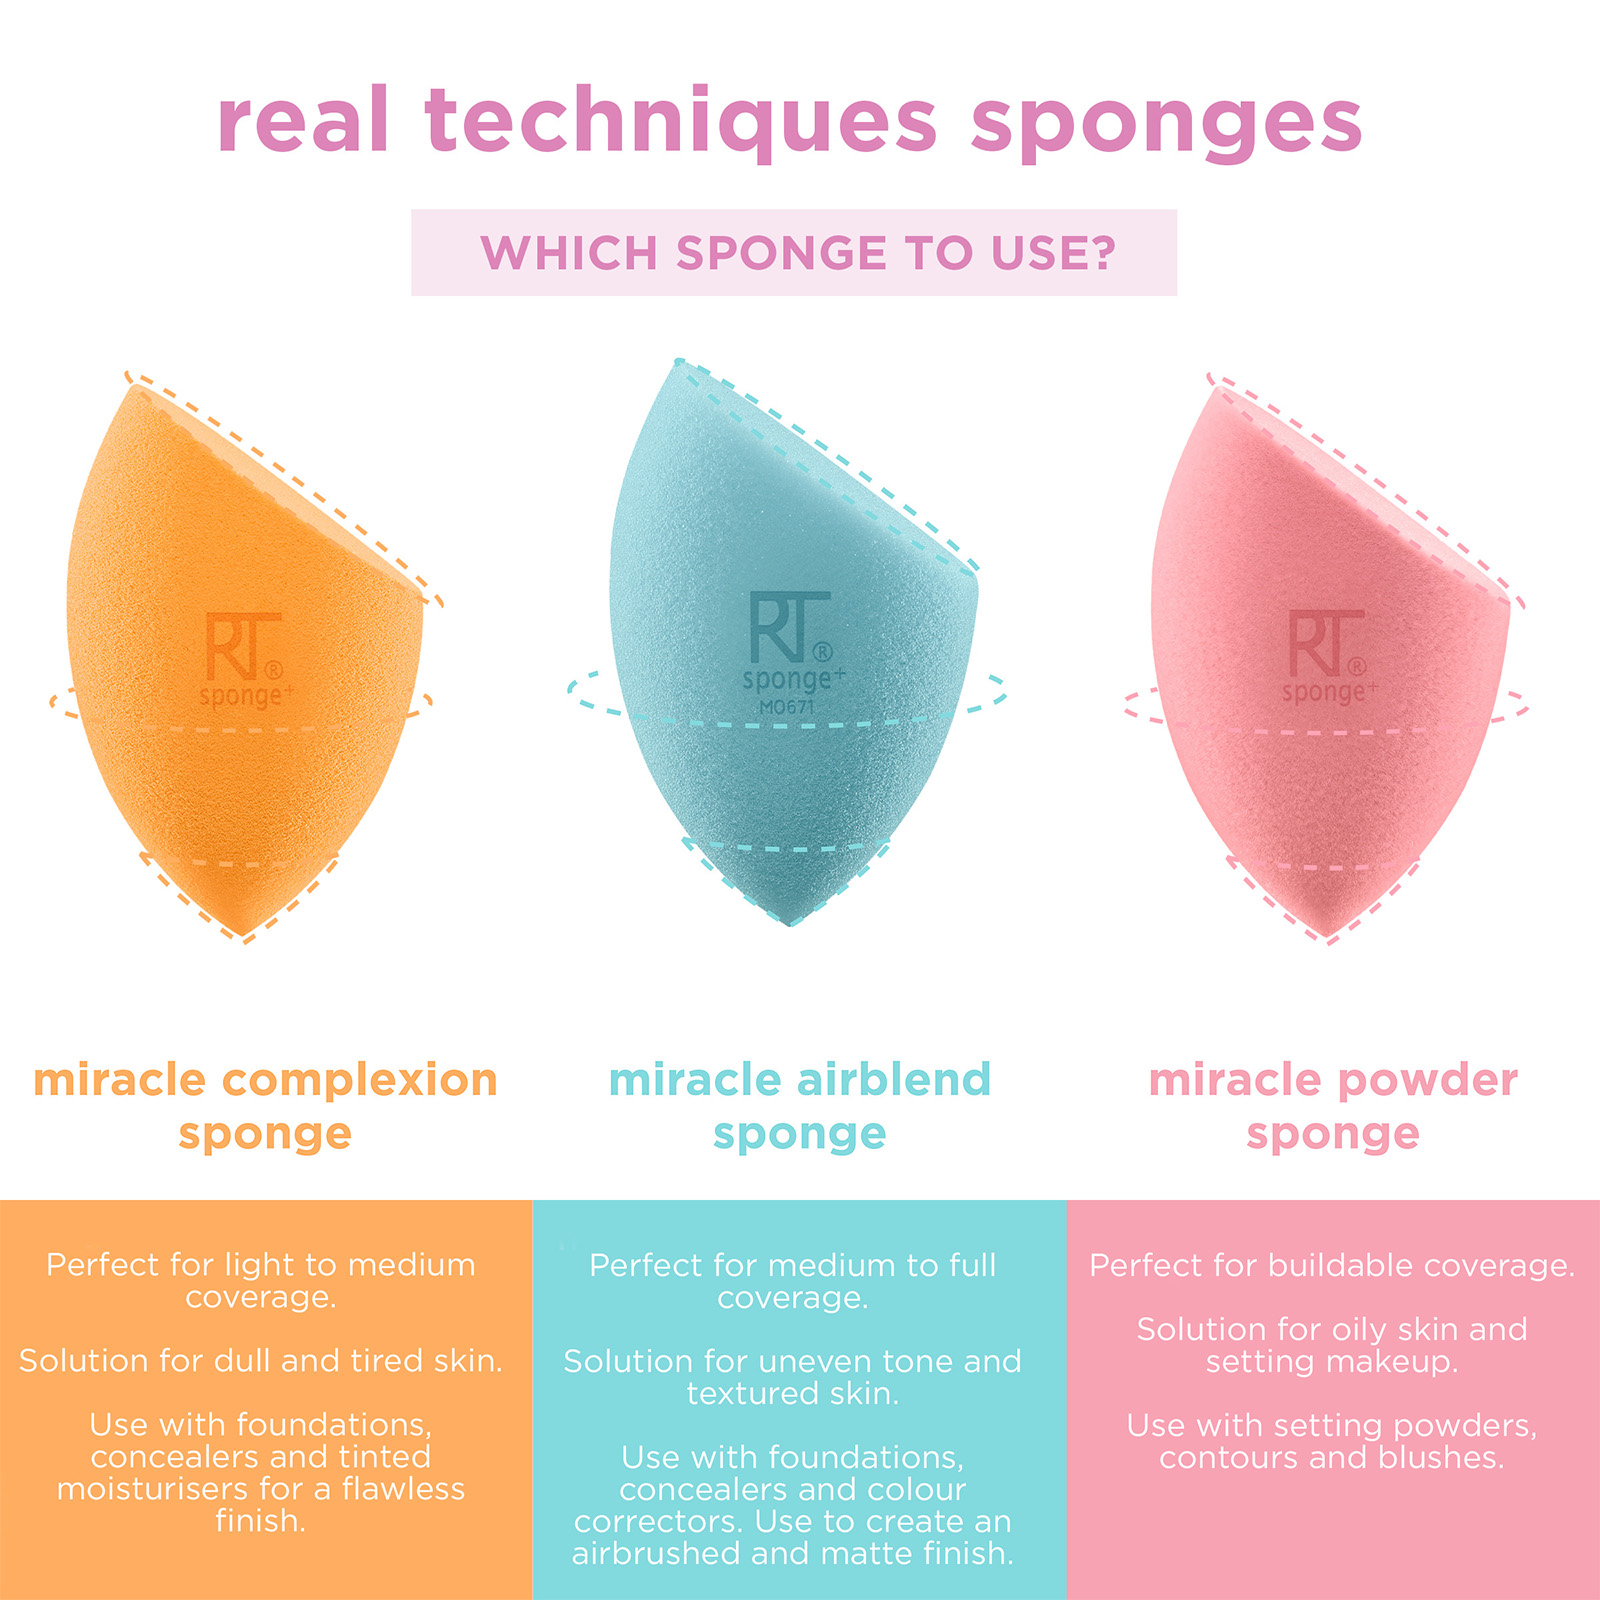 real techniques sponges. WHICH SPONGE TO USE? miracle complexion sponge. Perfect for light to medium. Solution for dull and tired skin. Use with foundations,
              concealers and tinted moisturisers for a flawless finish. miracle airblend sponge. Perfect for medium to full coverage. Solution for uneven tone and
              textured skin. Use with foundations, concealers and colour correctors. Use to create an airbrushed and matte finish. Miracle powder sponge. Perfect for buildable coverage. Solution for oily skin and setting makeup. Use with setting powders, contours and blushes.